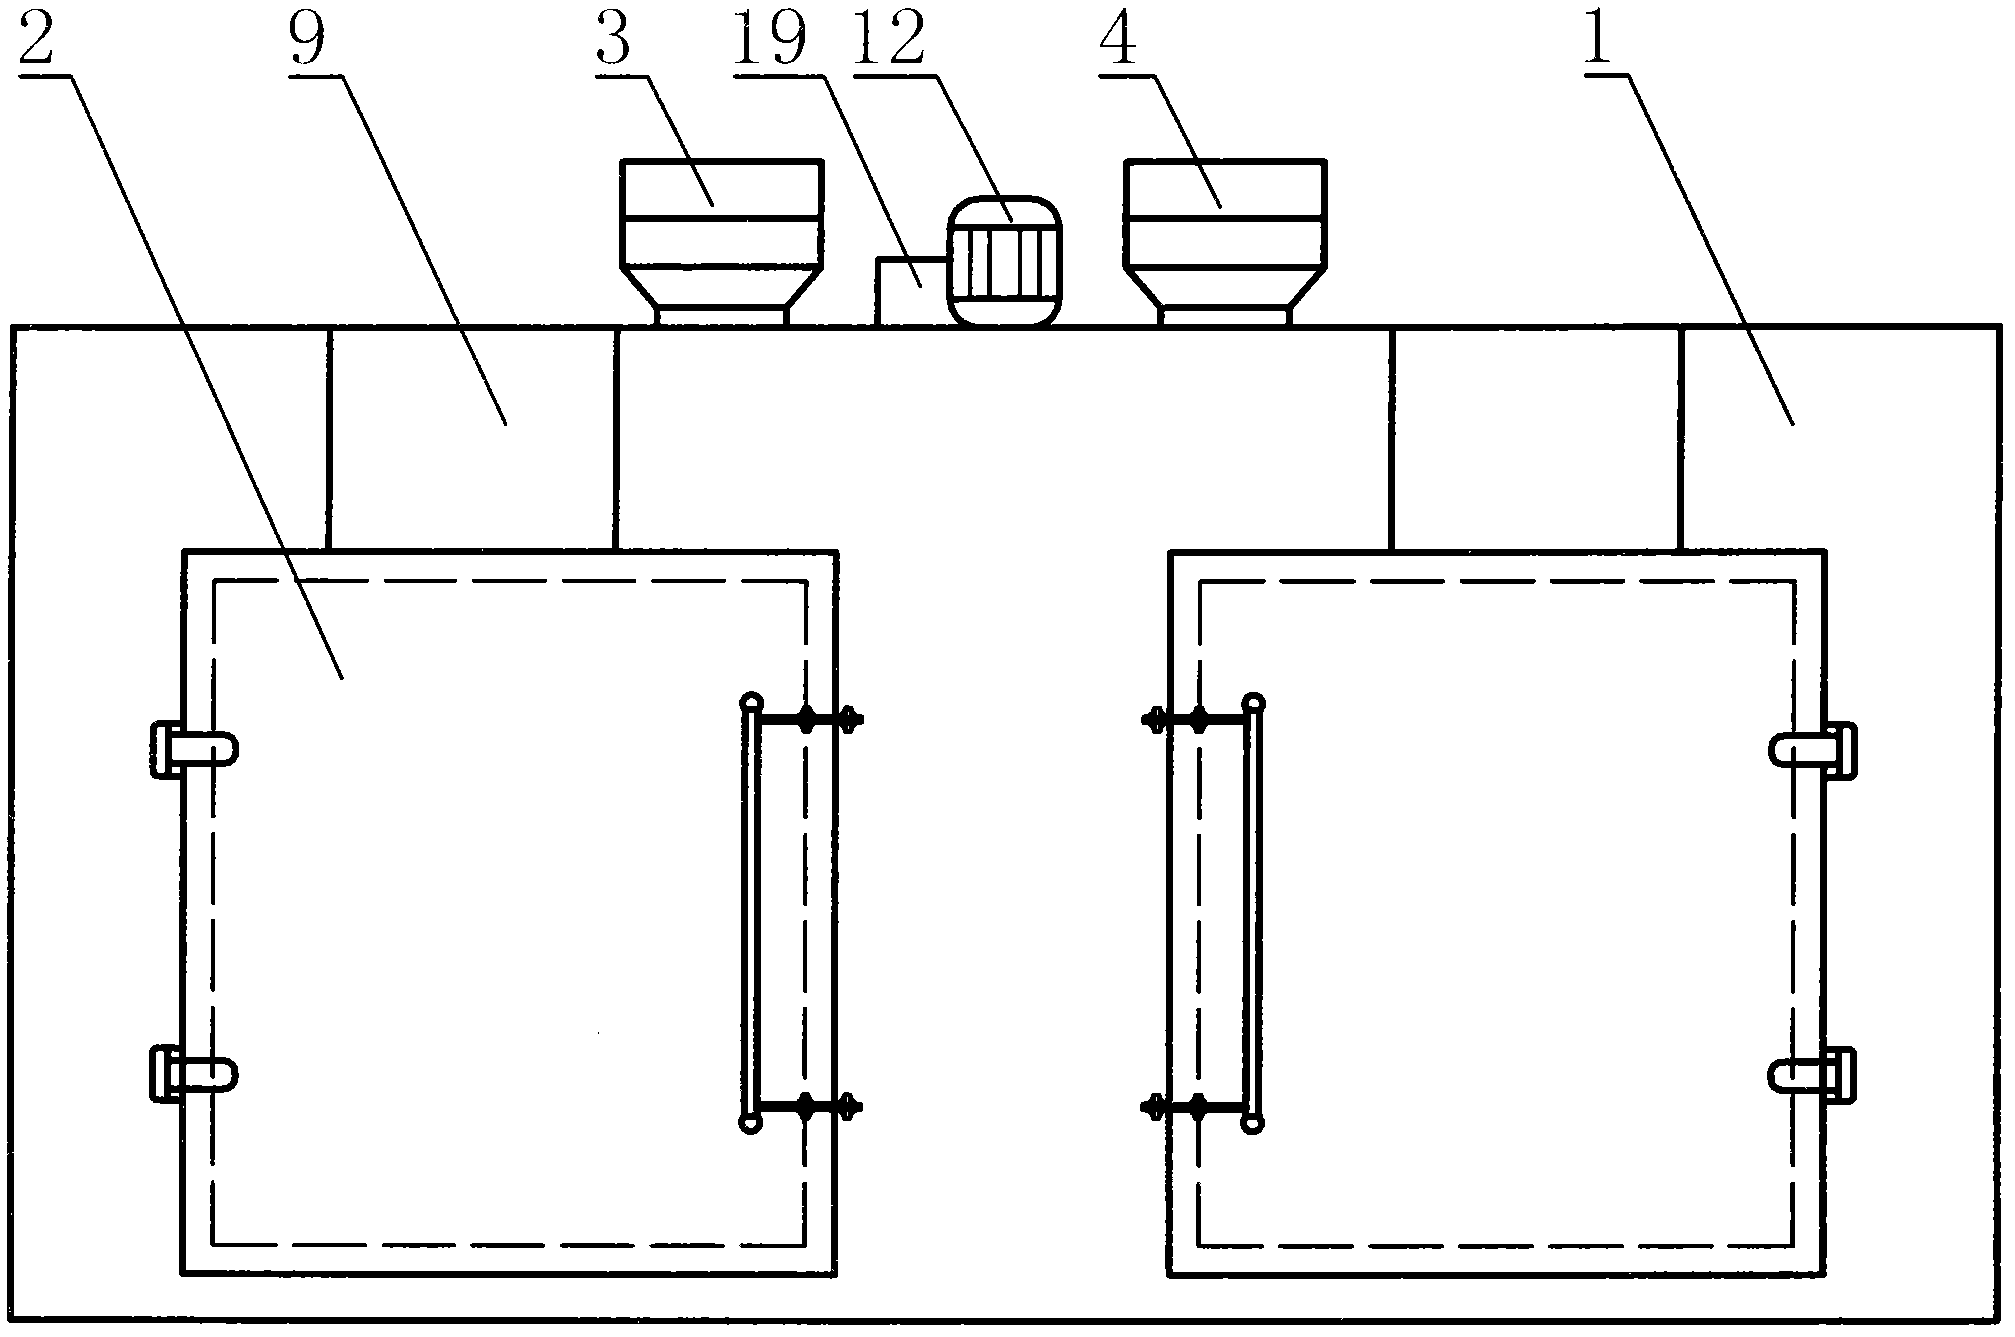 Inflatable-seal-type cross-flow drying oven with dual drying cars